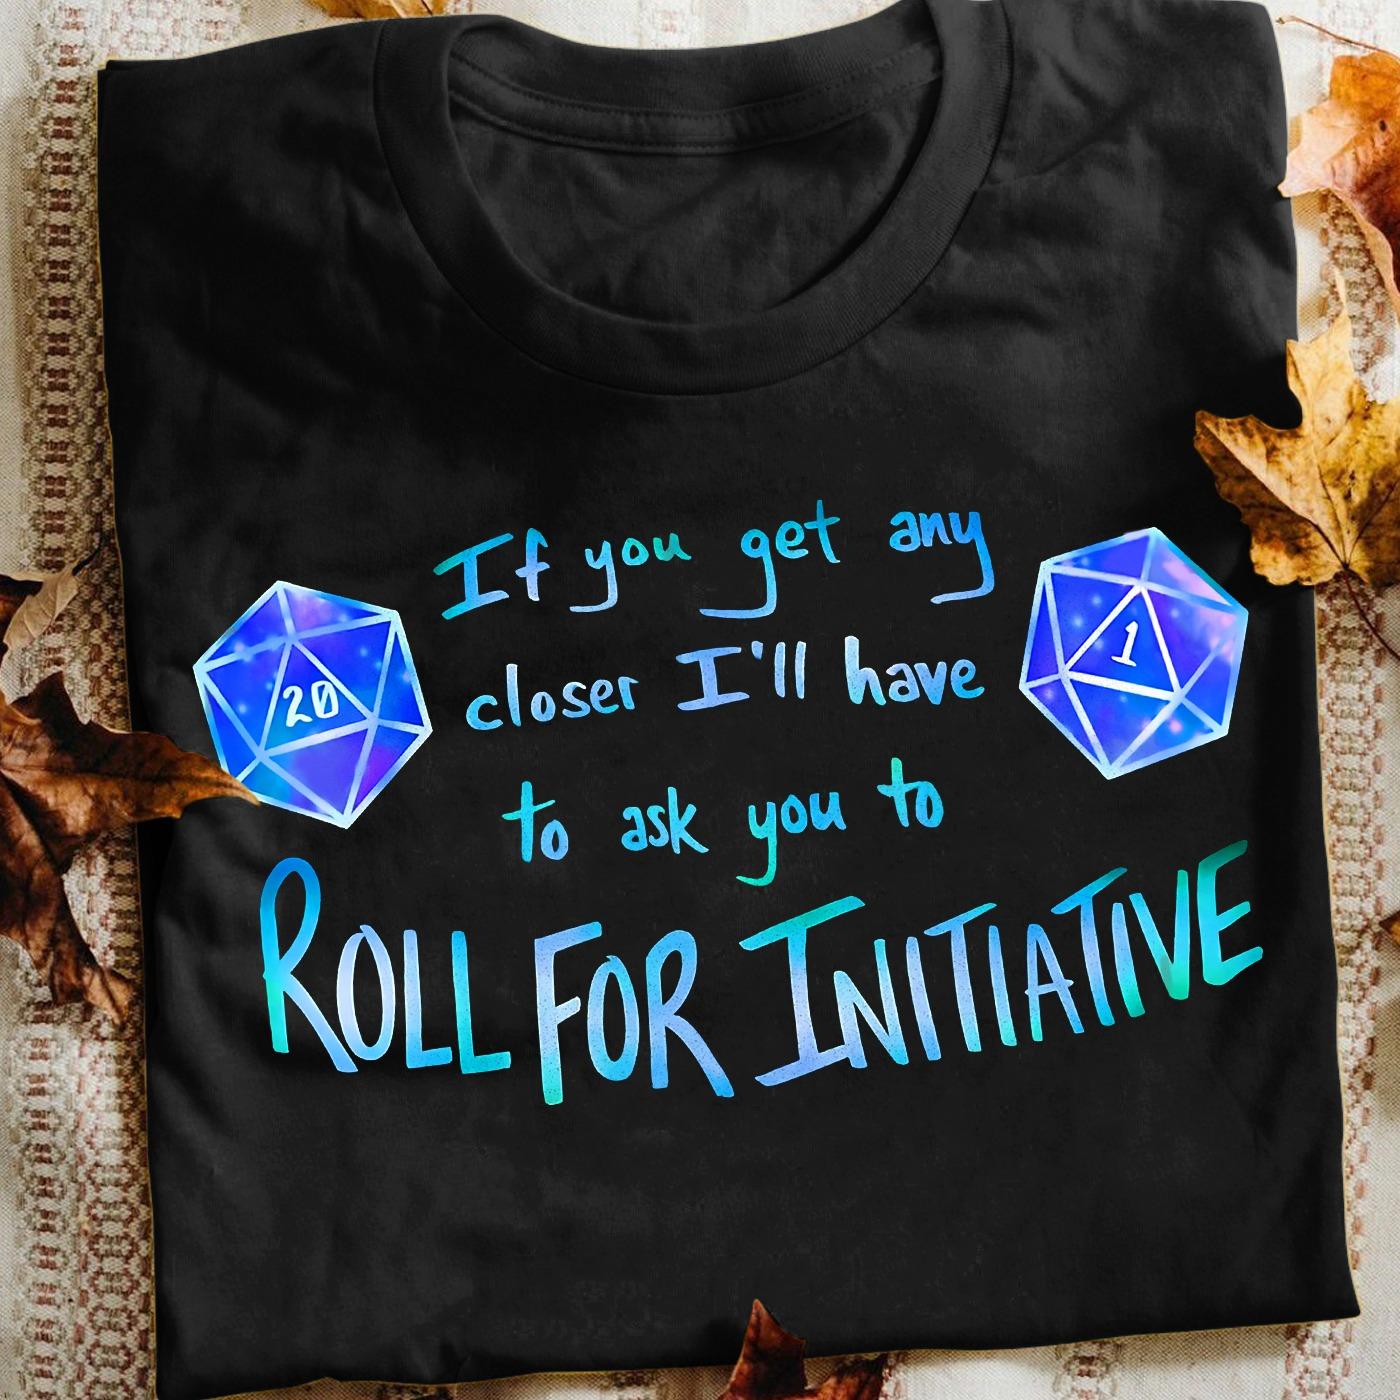 If you get any closer I'll have to ask you to roll for initiative - Dungeons and Dragons